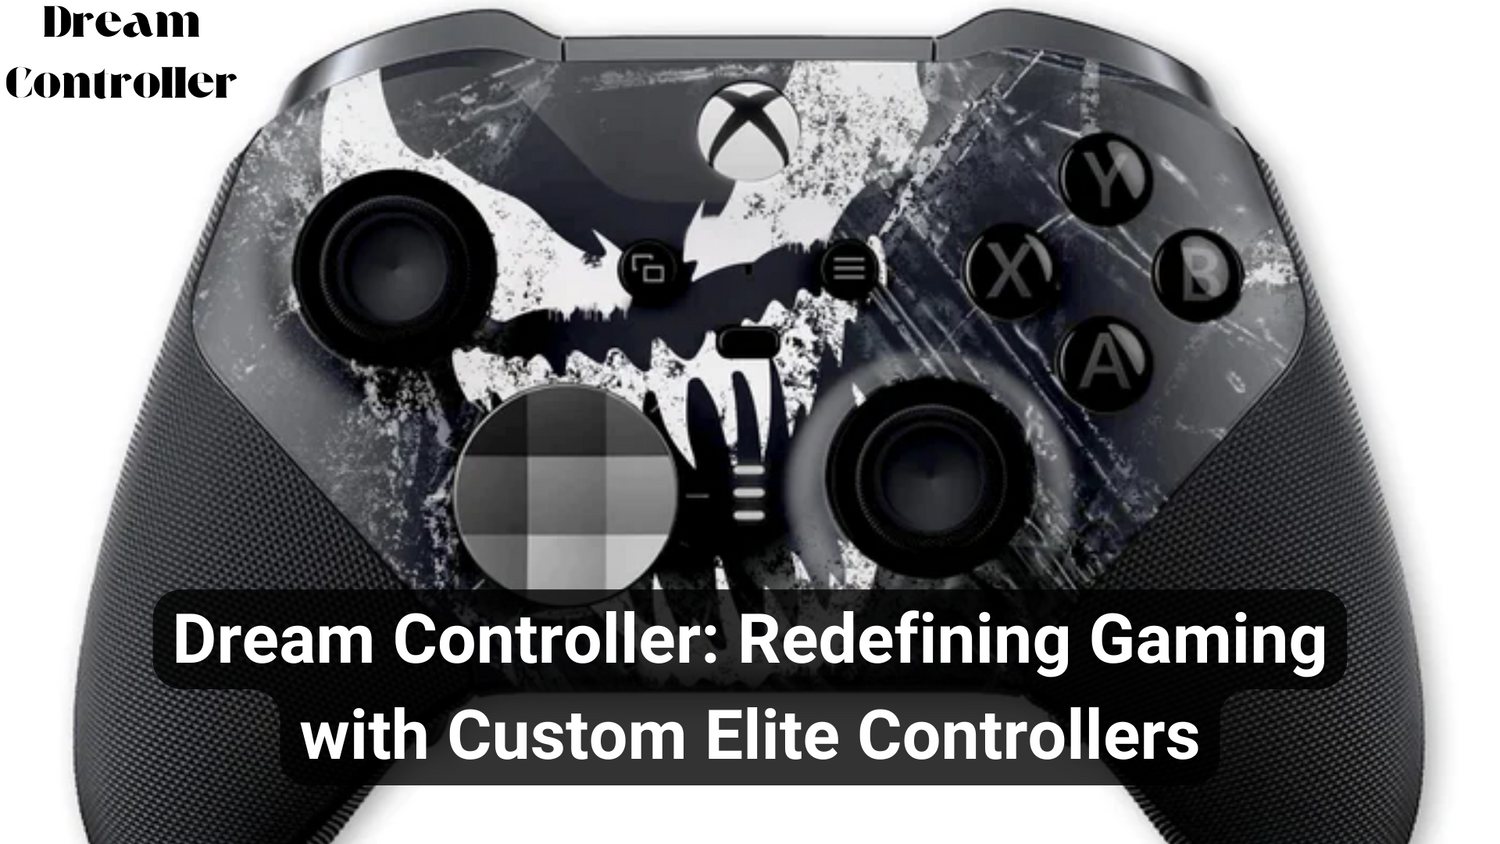 Dream Controller: Redefining Gaming with Custom Elite Controllers